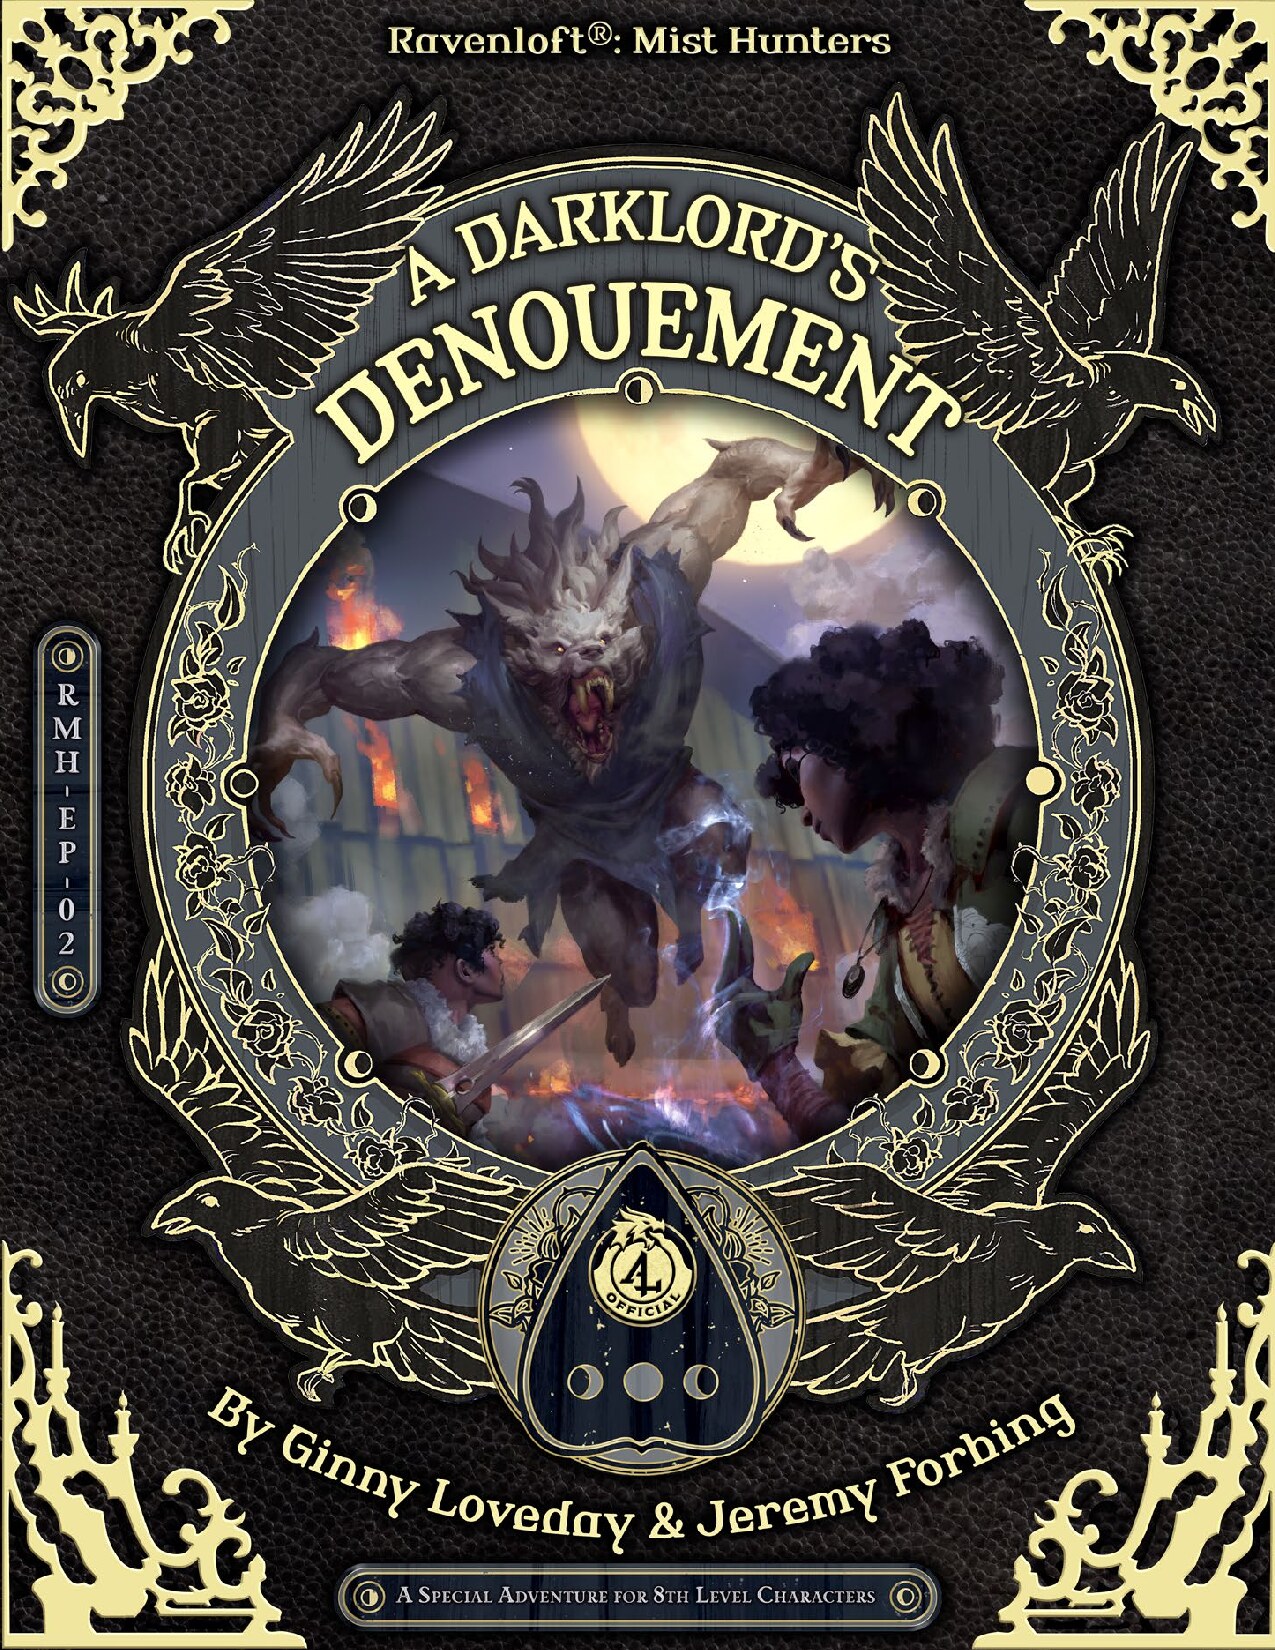 RMH-EP-02 A Darklord's Denouement